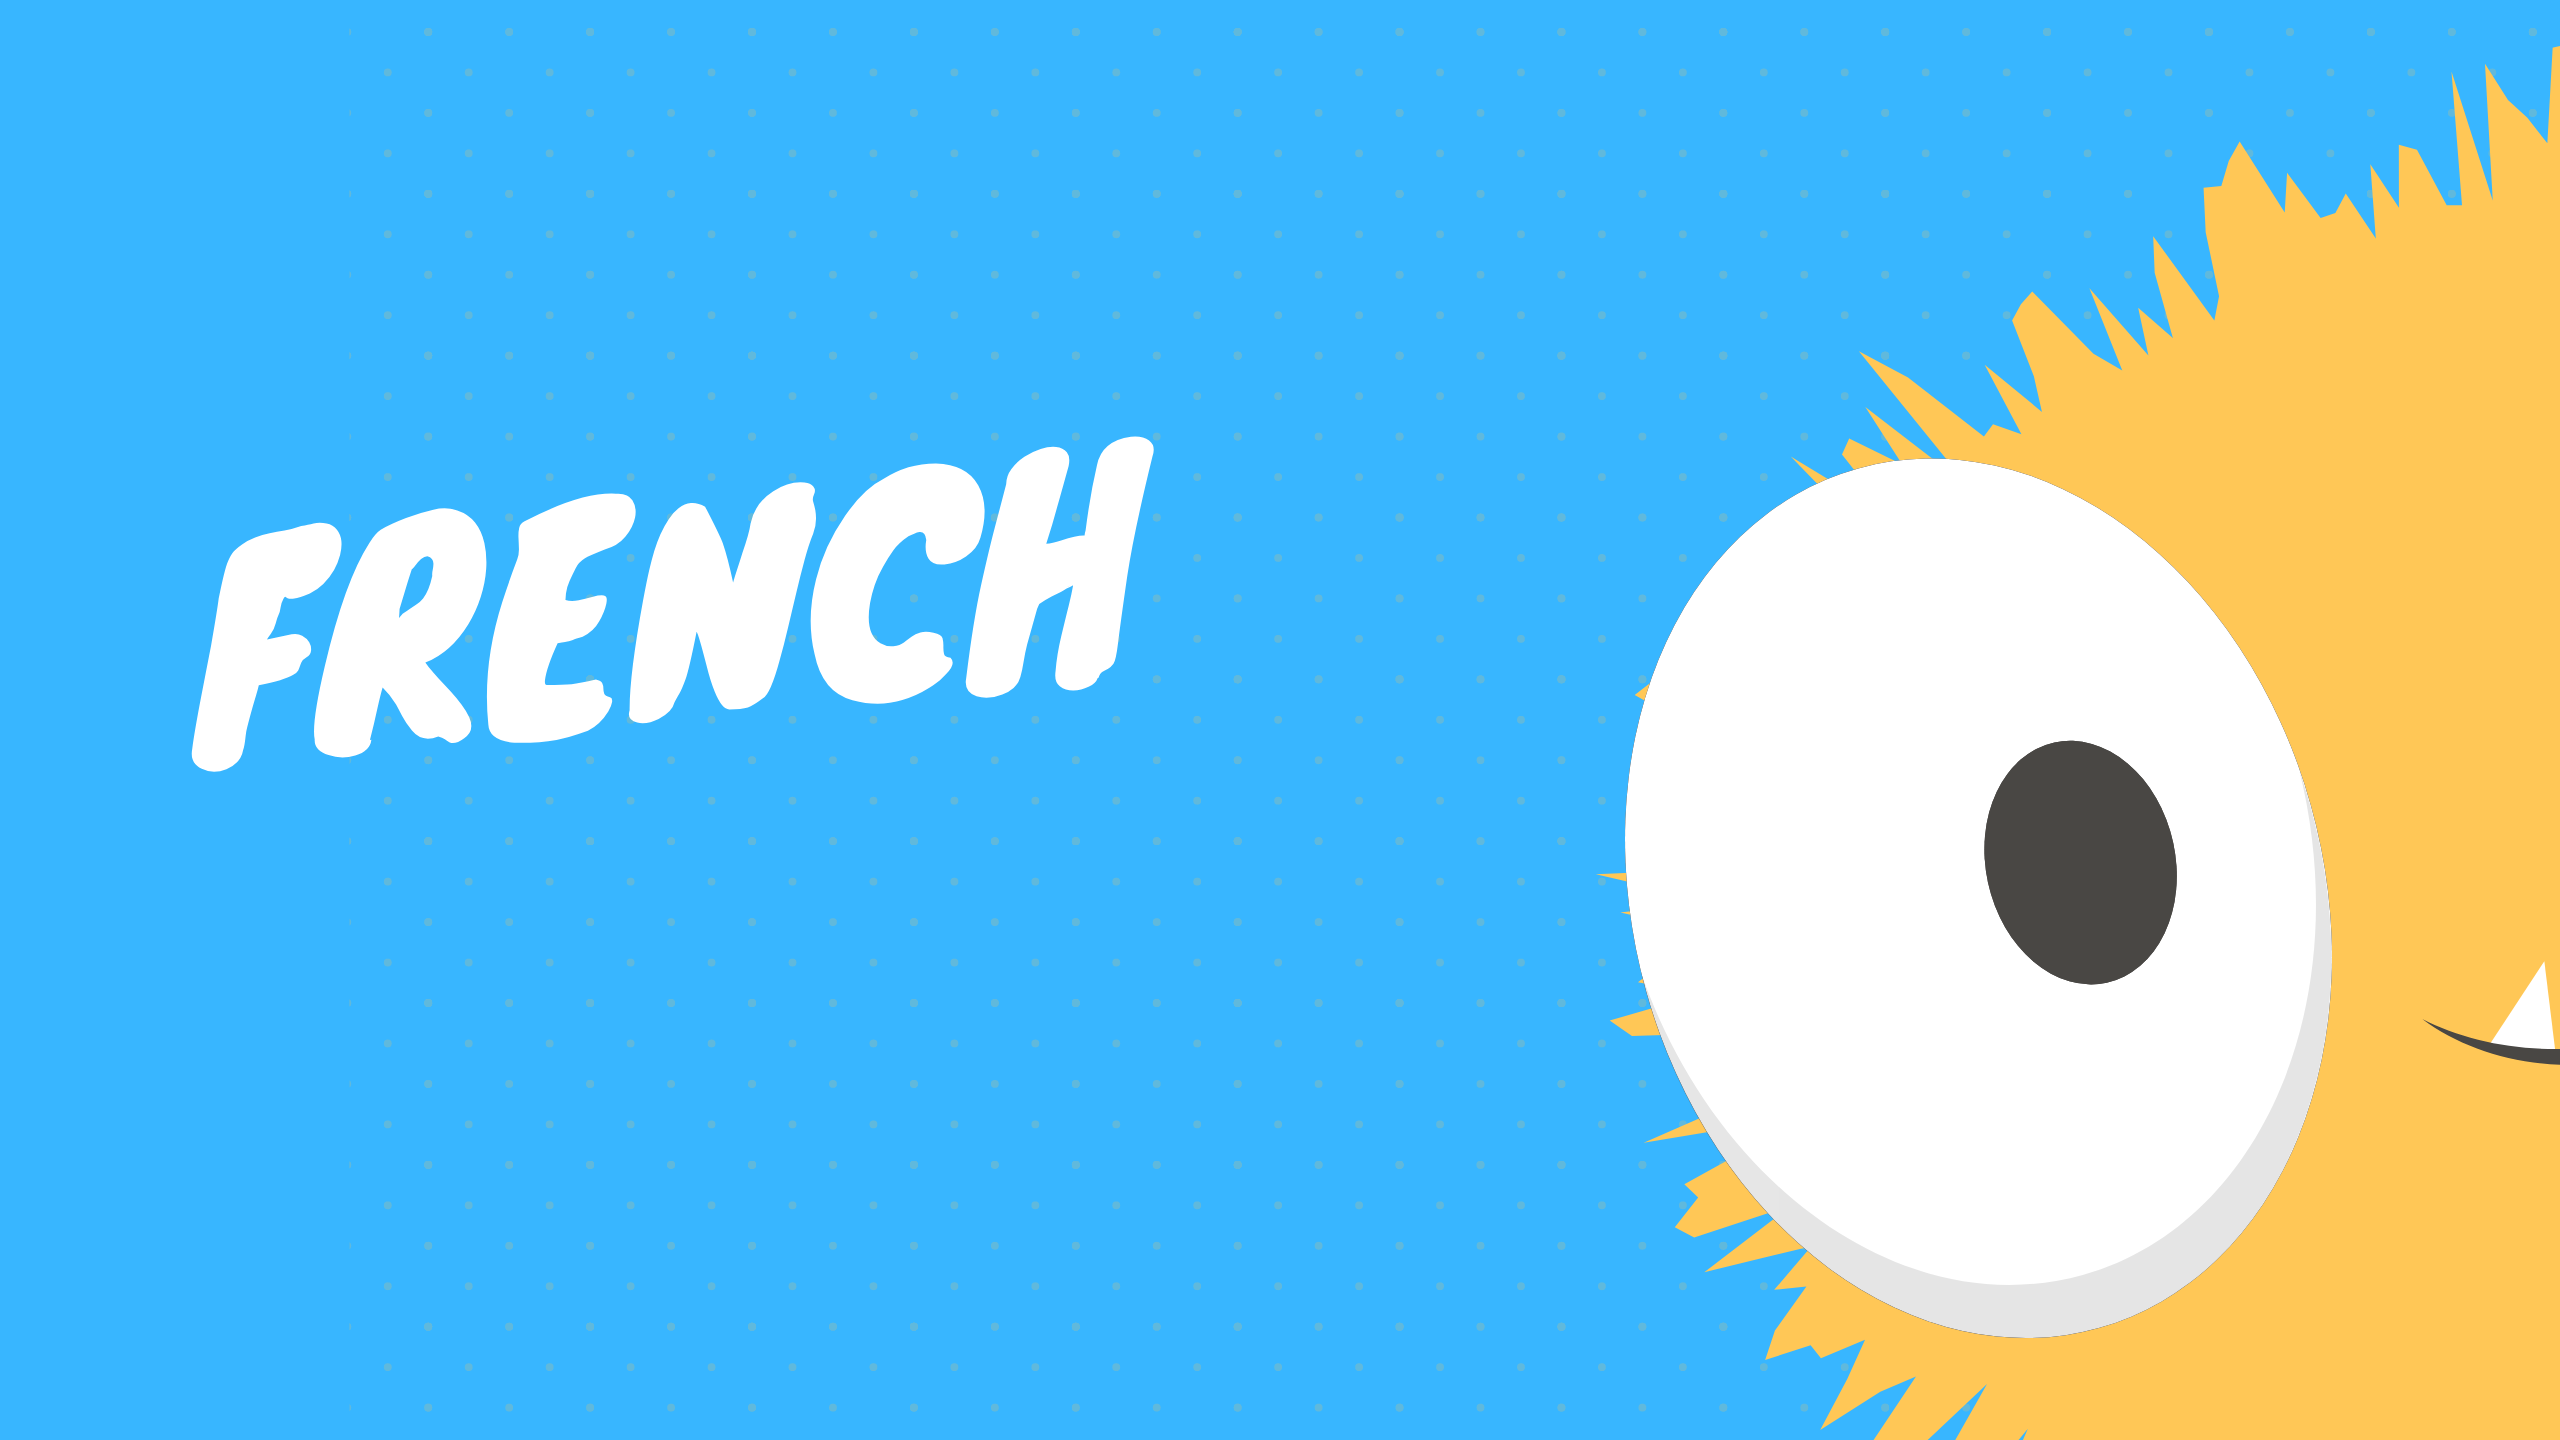 French verbs to learn as a beginner, free vocabulary list with conjugations [DOWNLOADABLE]